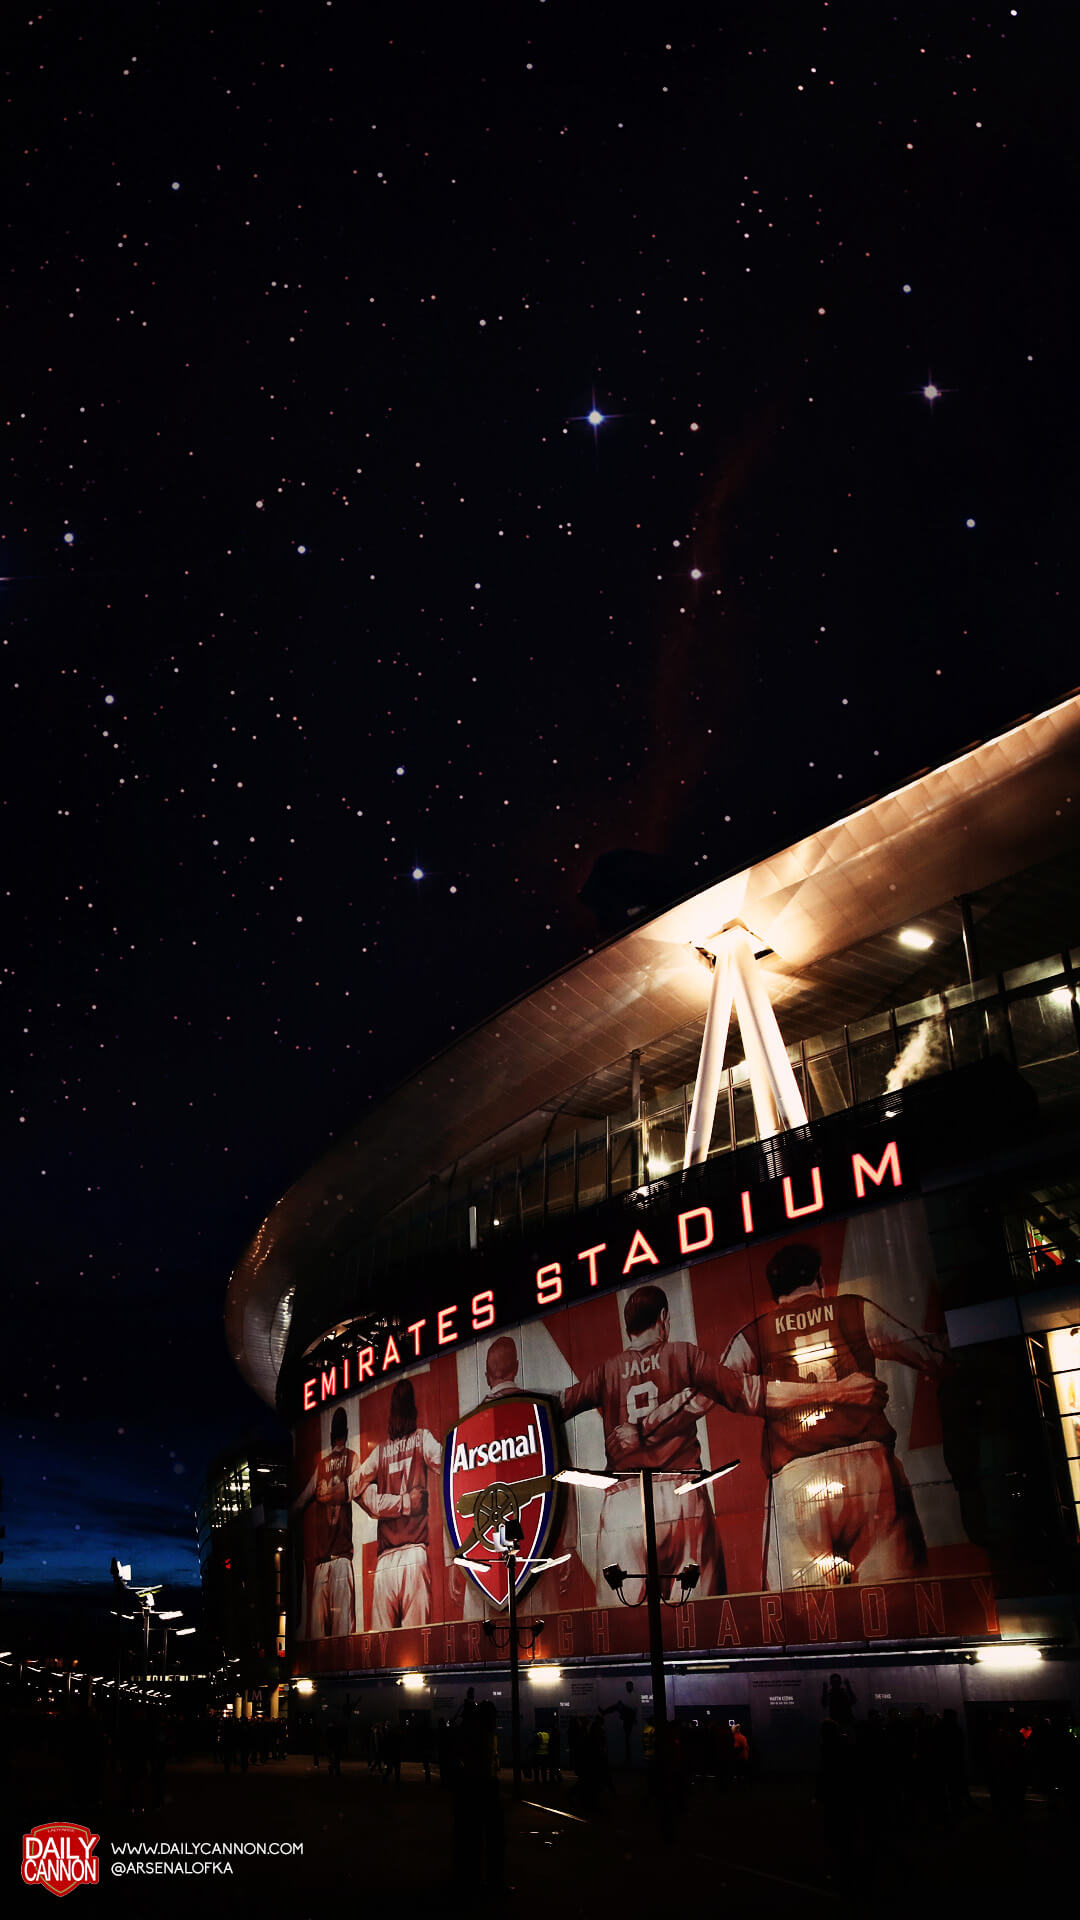 Superb Arsenal Mobile wallpapers from happier times